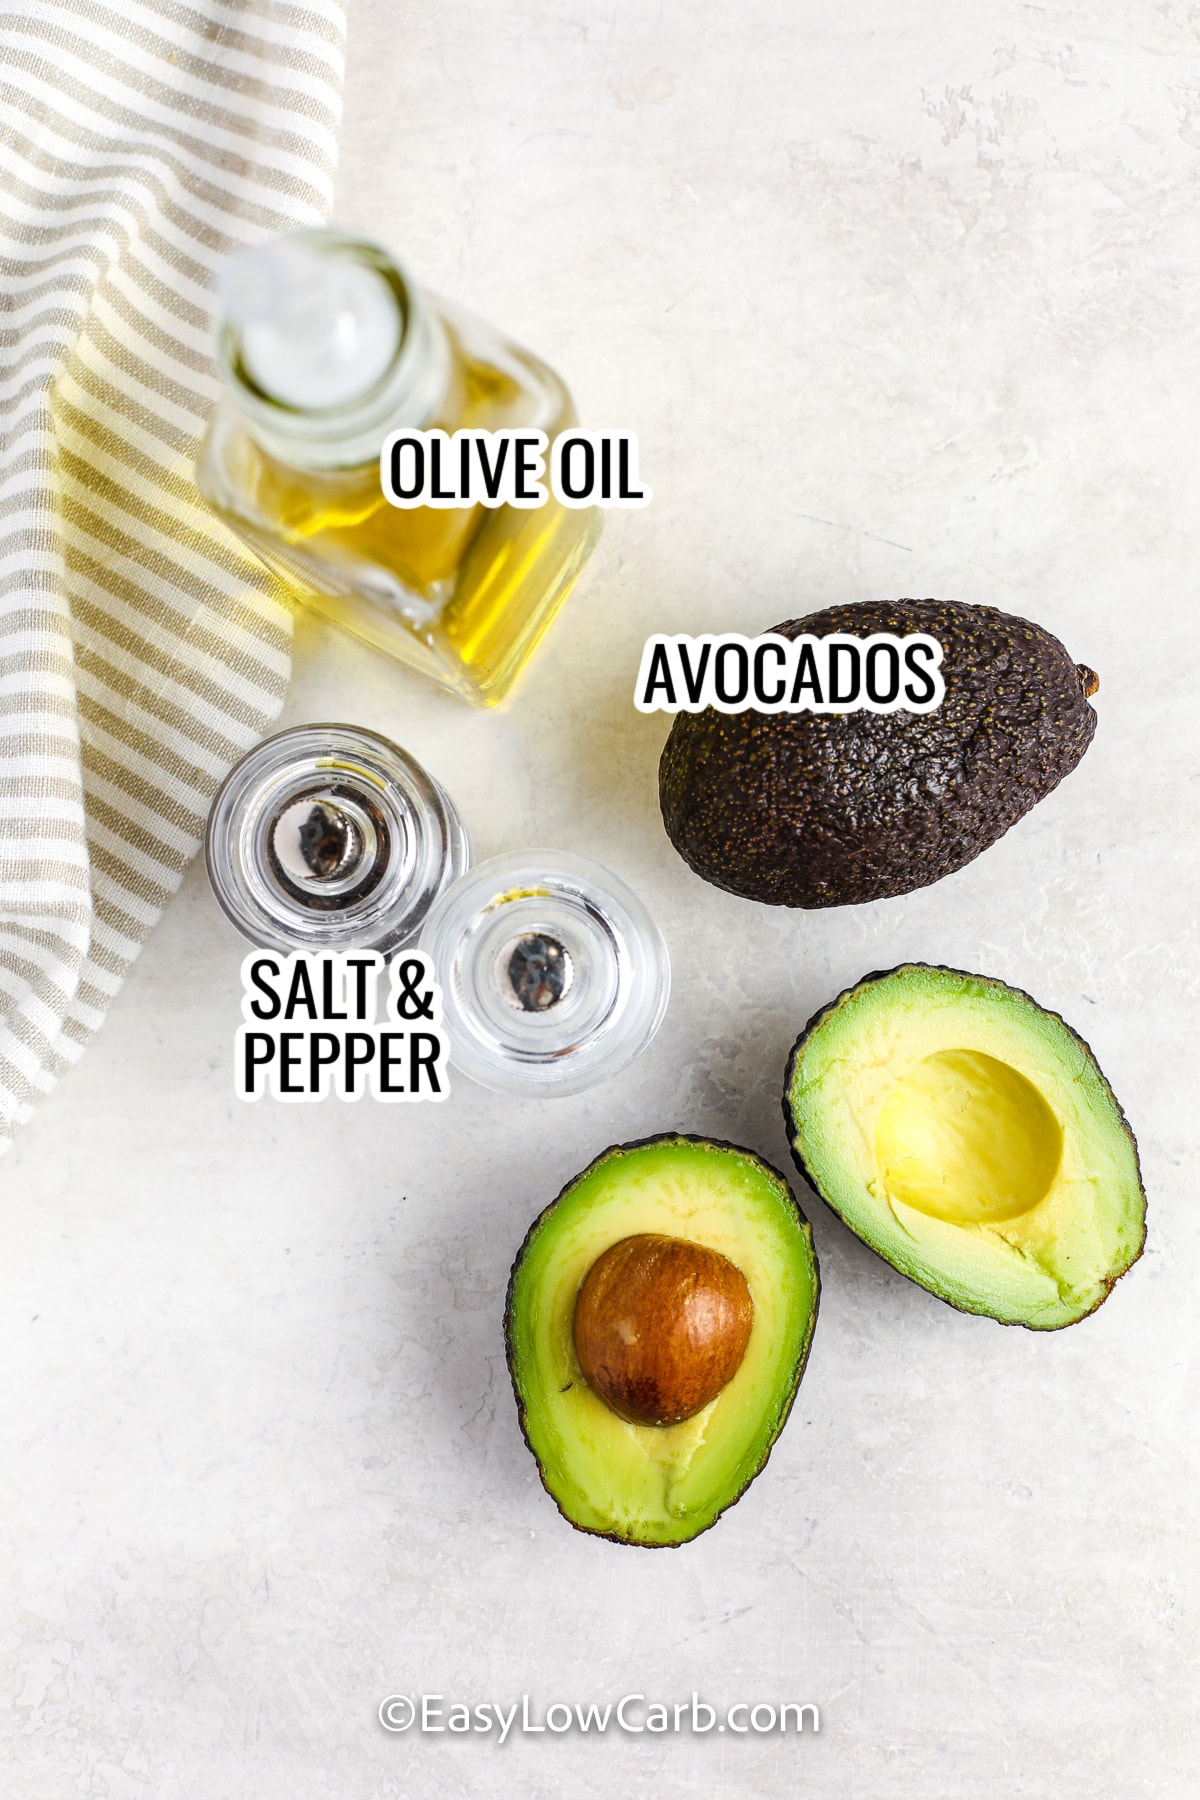 ingredients assembled to make grilled avocado, including avocado, salt and pepper, and olive oil